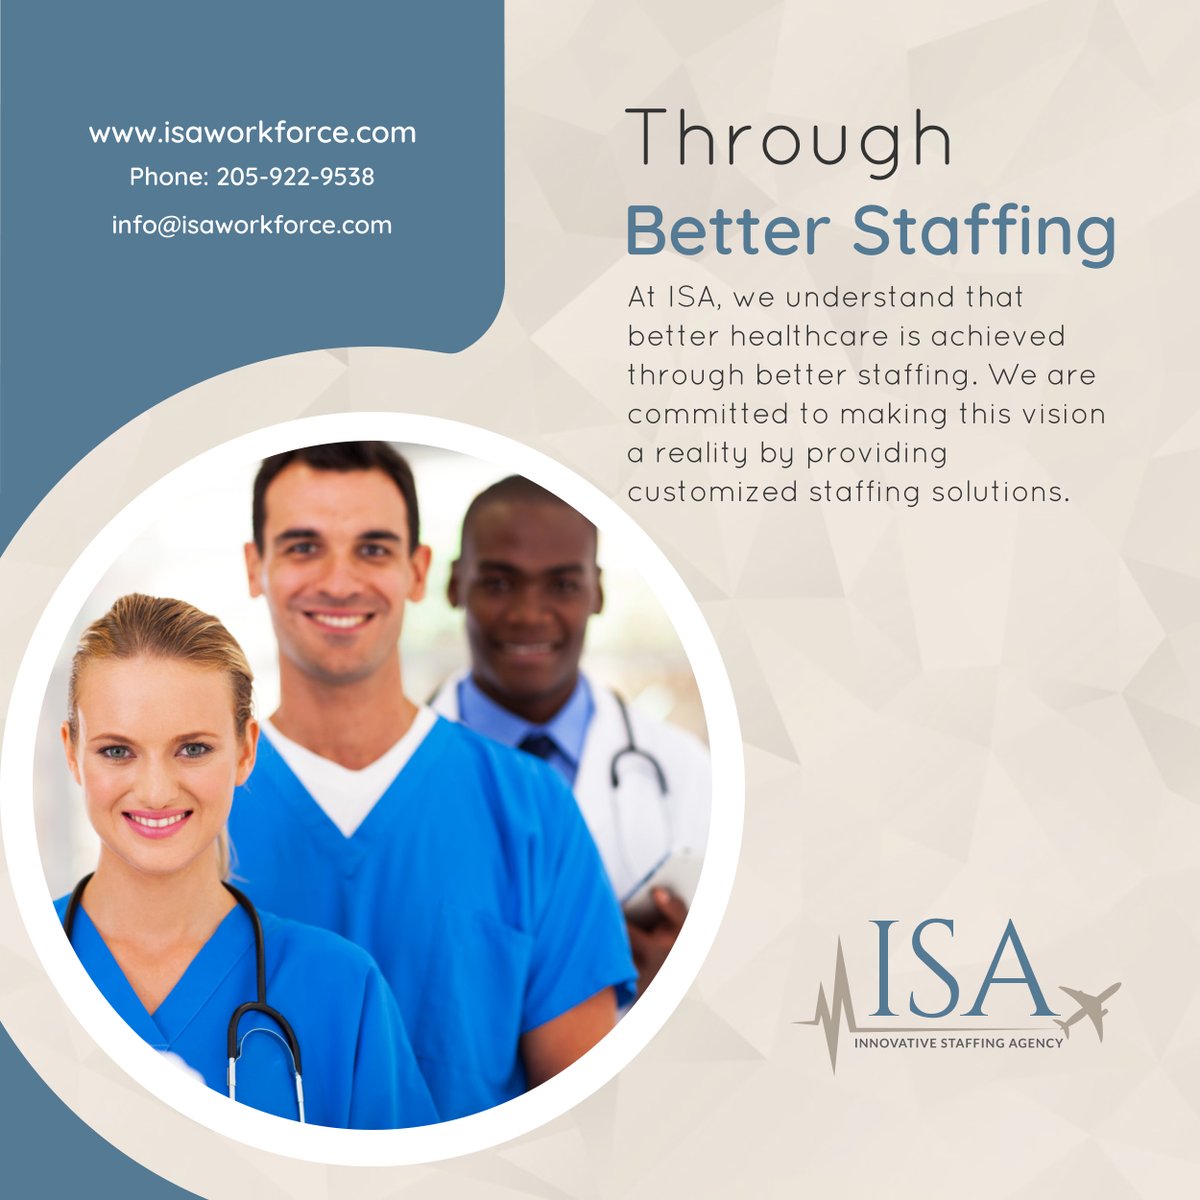 Unlock the potential of your facility with ISA's commitment to quality patient care and staff optimization, and watch as your organization reaches new heights. Give us a call today!

#QualityPatientCare #StaffOptimization #InnovativeStaffingAgency #HealthcareStaffing